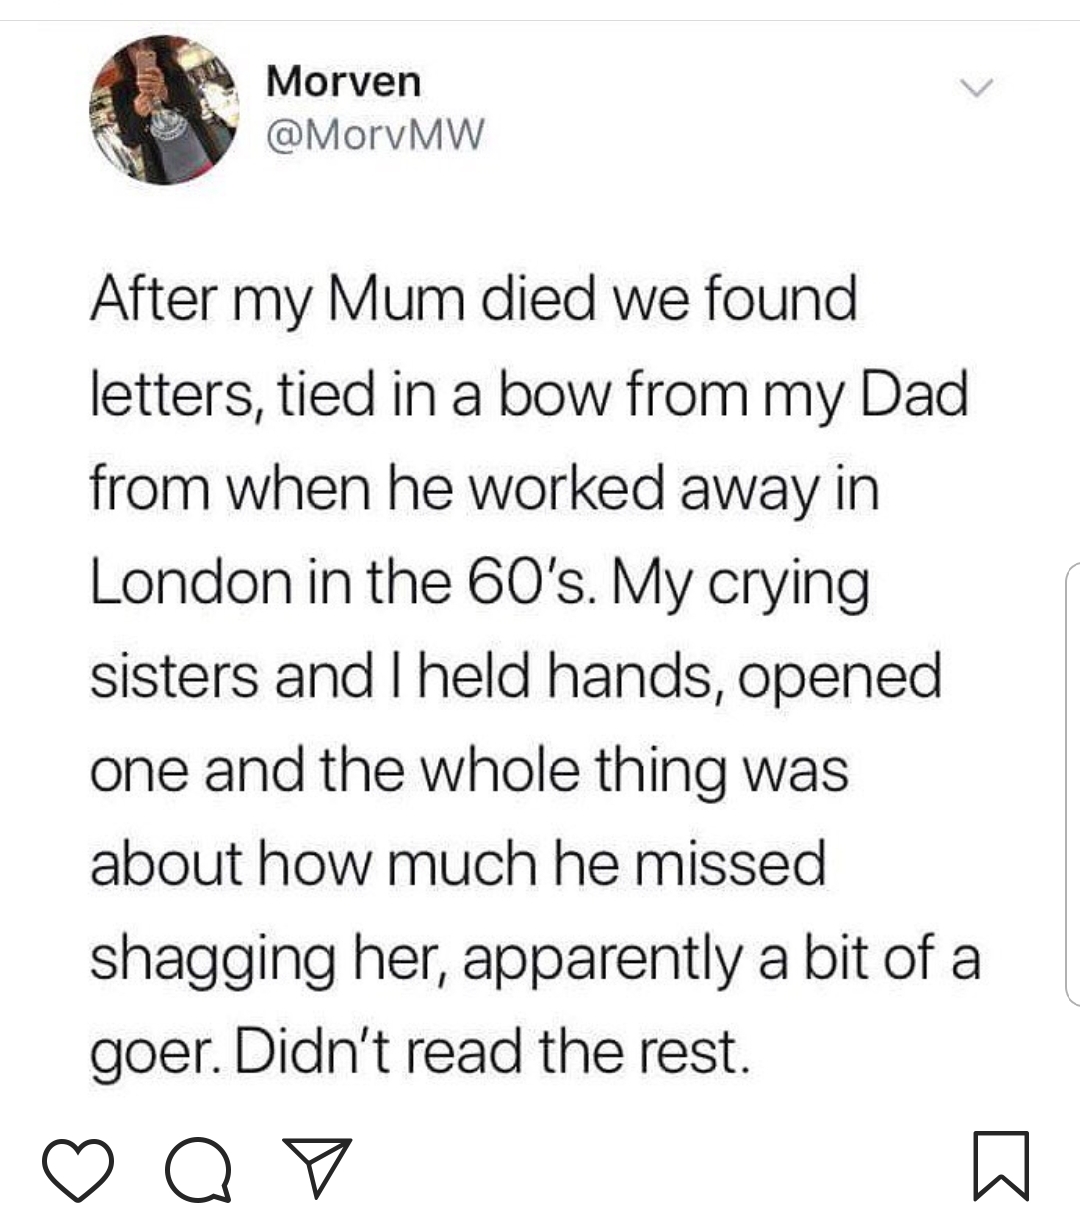 touching letters - Morven After my Mum died we found letters, tied in a bow from my Dad from when he worked away in London in the 60's. My crying sisters and I held hands, opened one and the whole thing was about how much he missed shagging her, apparentl